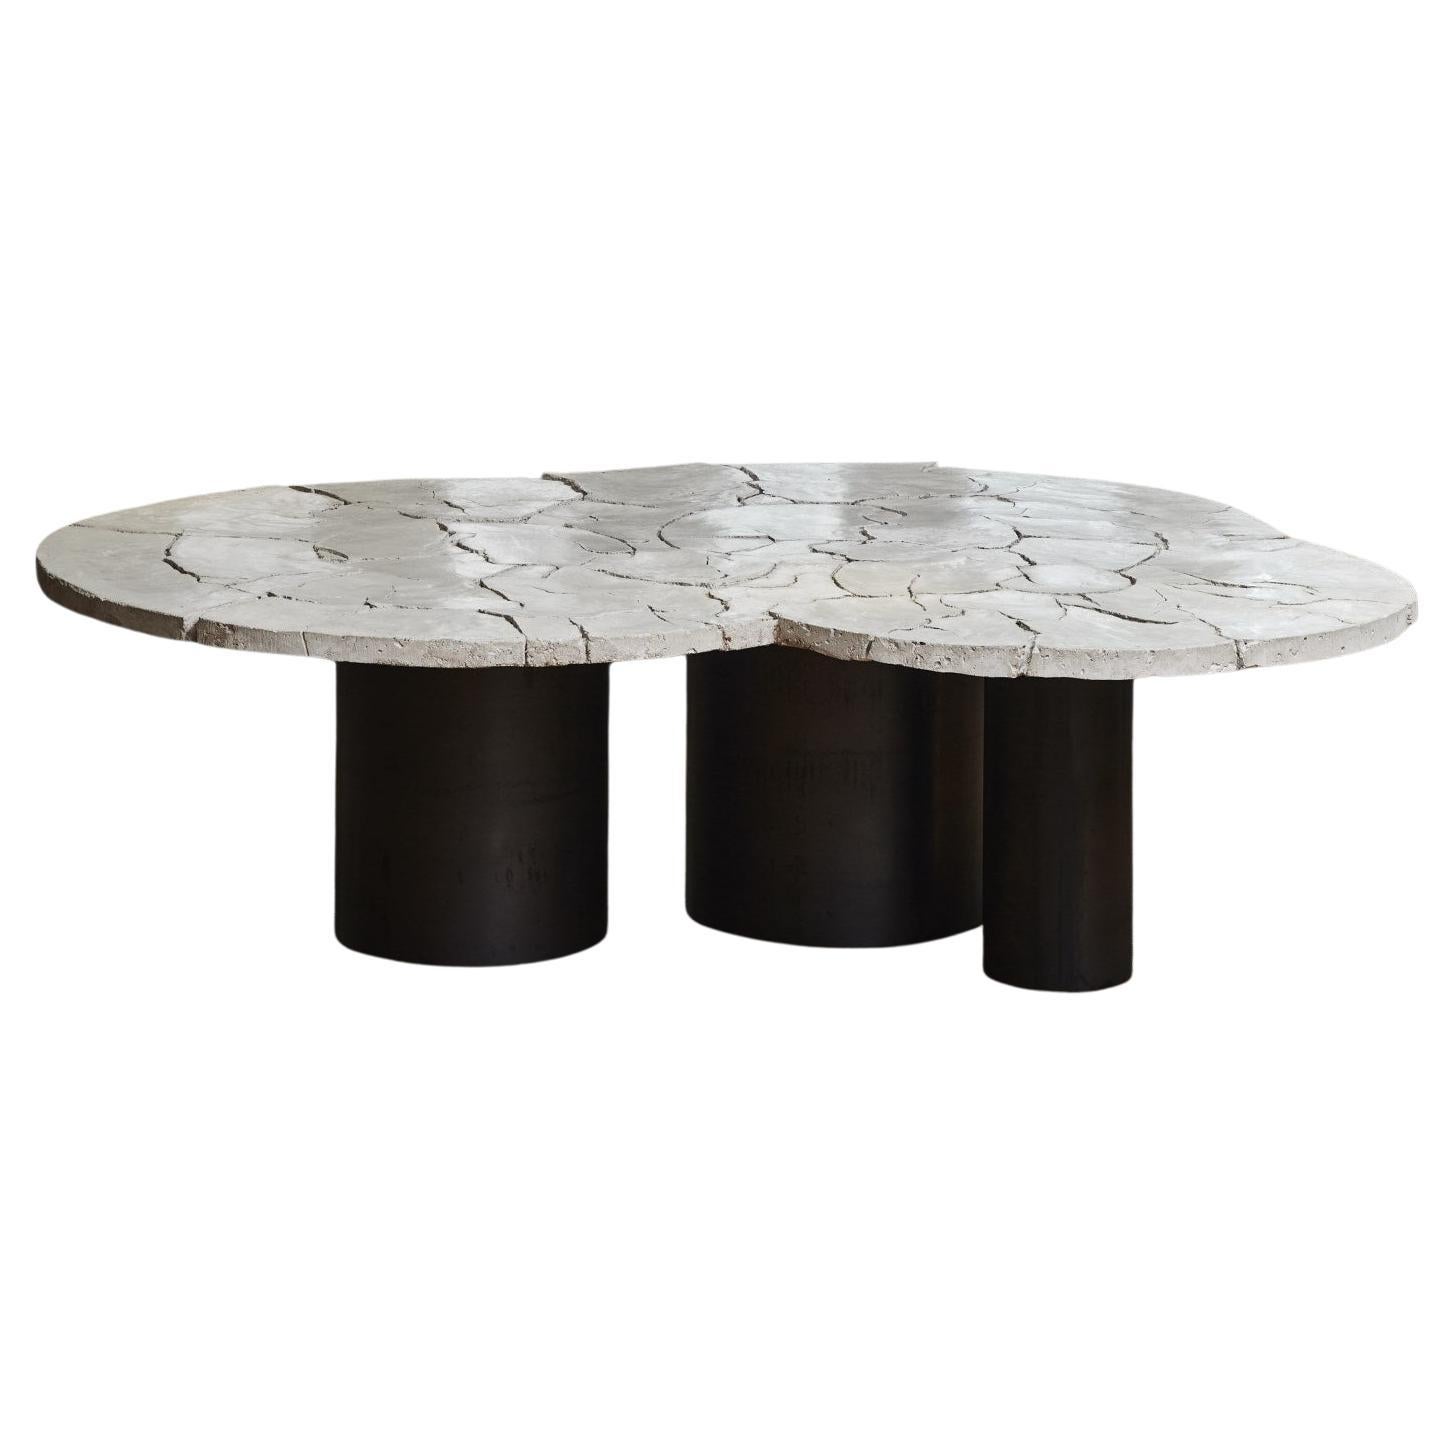 "Cracked Earth" coffee table by Erwan Boulloud For Sale